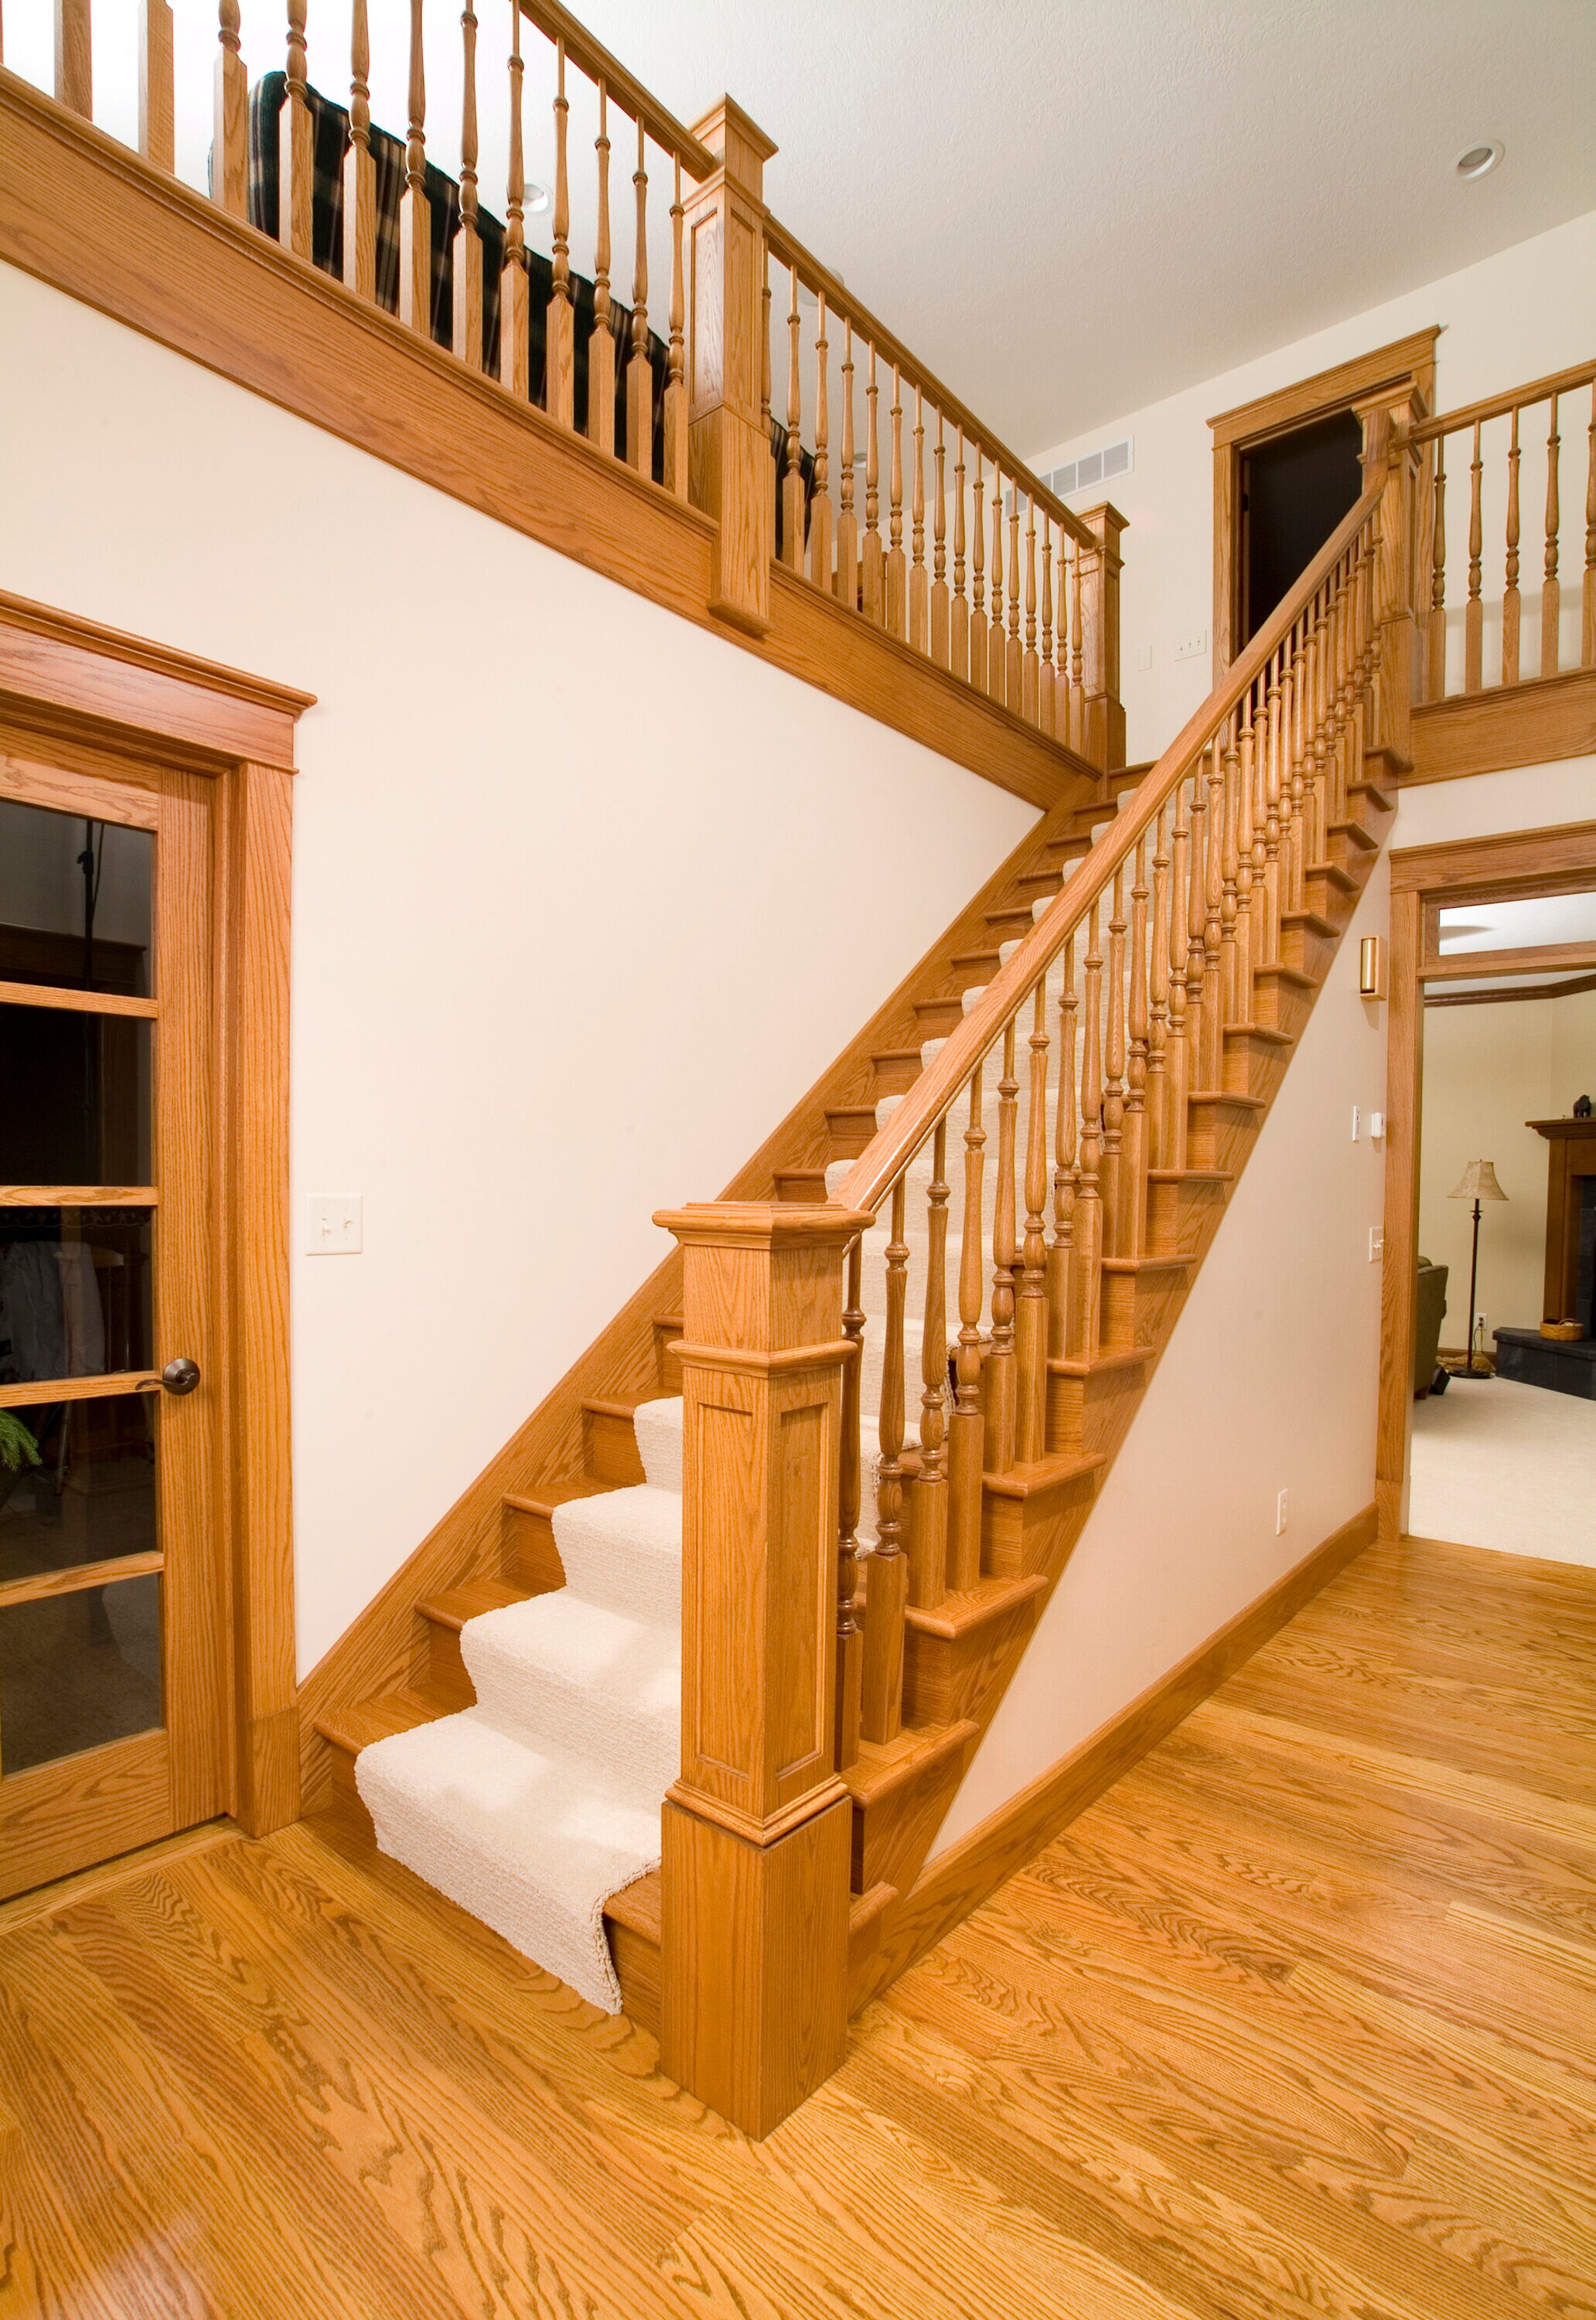 L.J. Smith Stair Systems